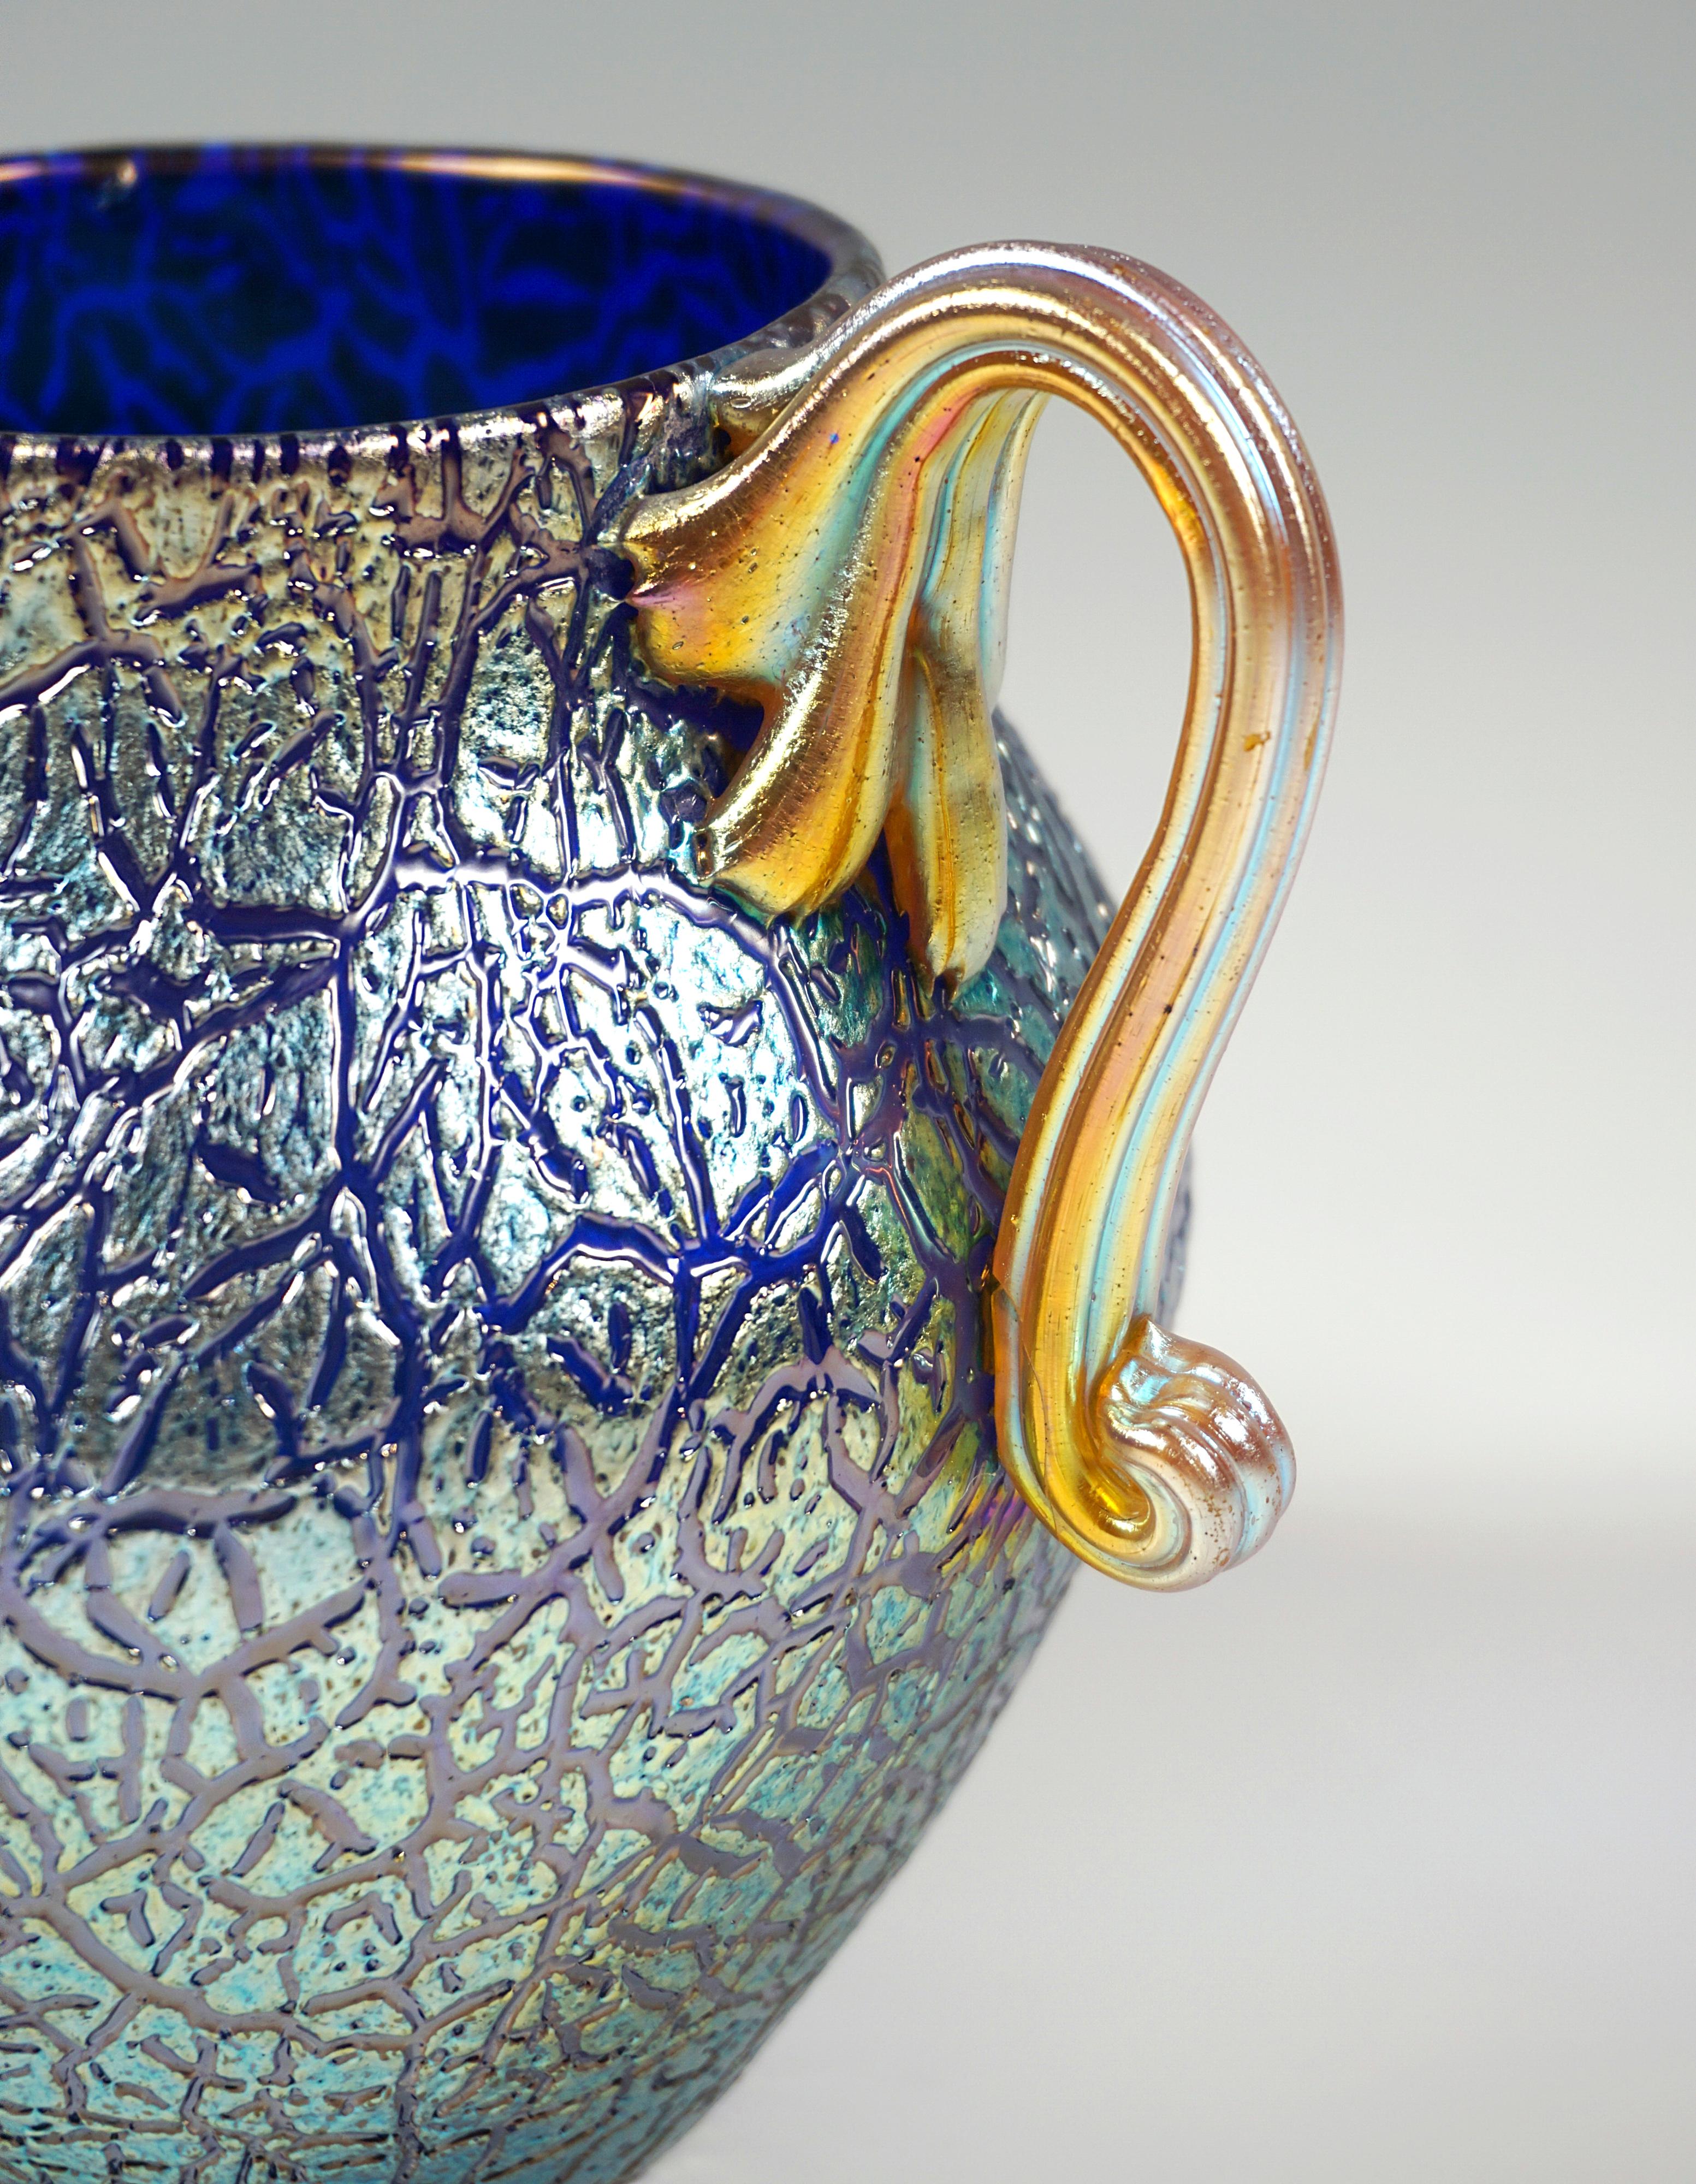 Loetz Art Nouveau Vase Cobalt Mimosa with 2 Handles, Austria-Hungary, circa 1909 In Good Condition For Sale In Vienna, AT